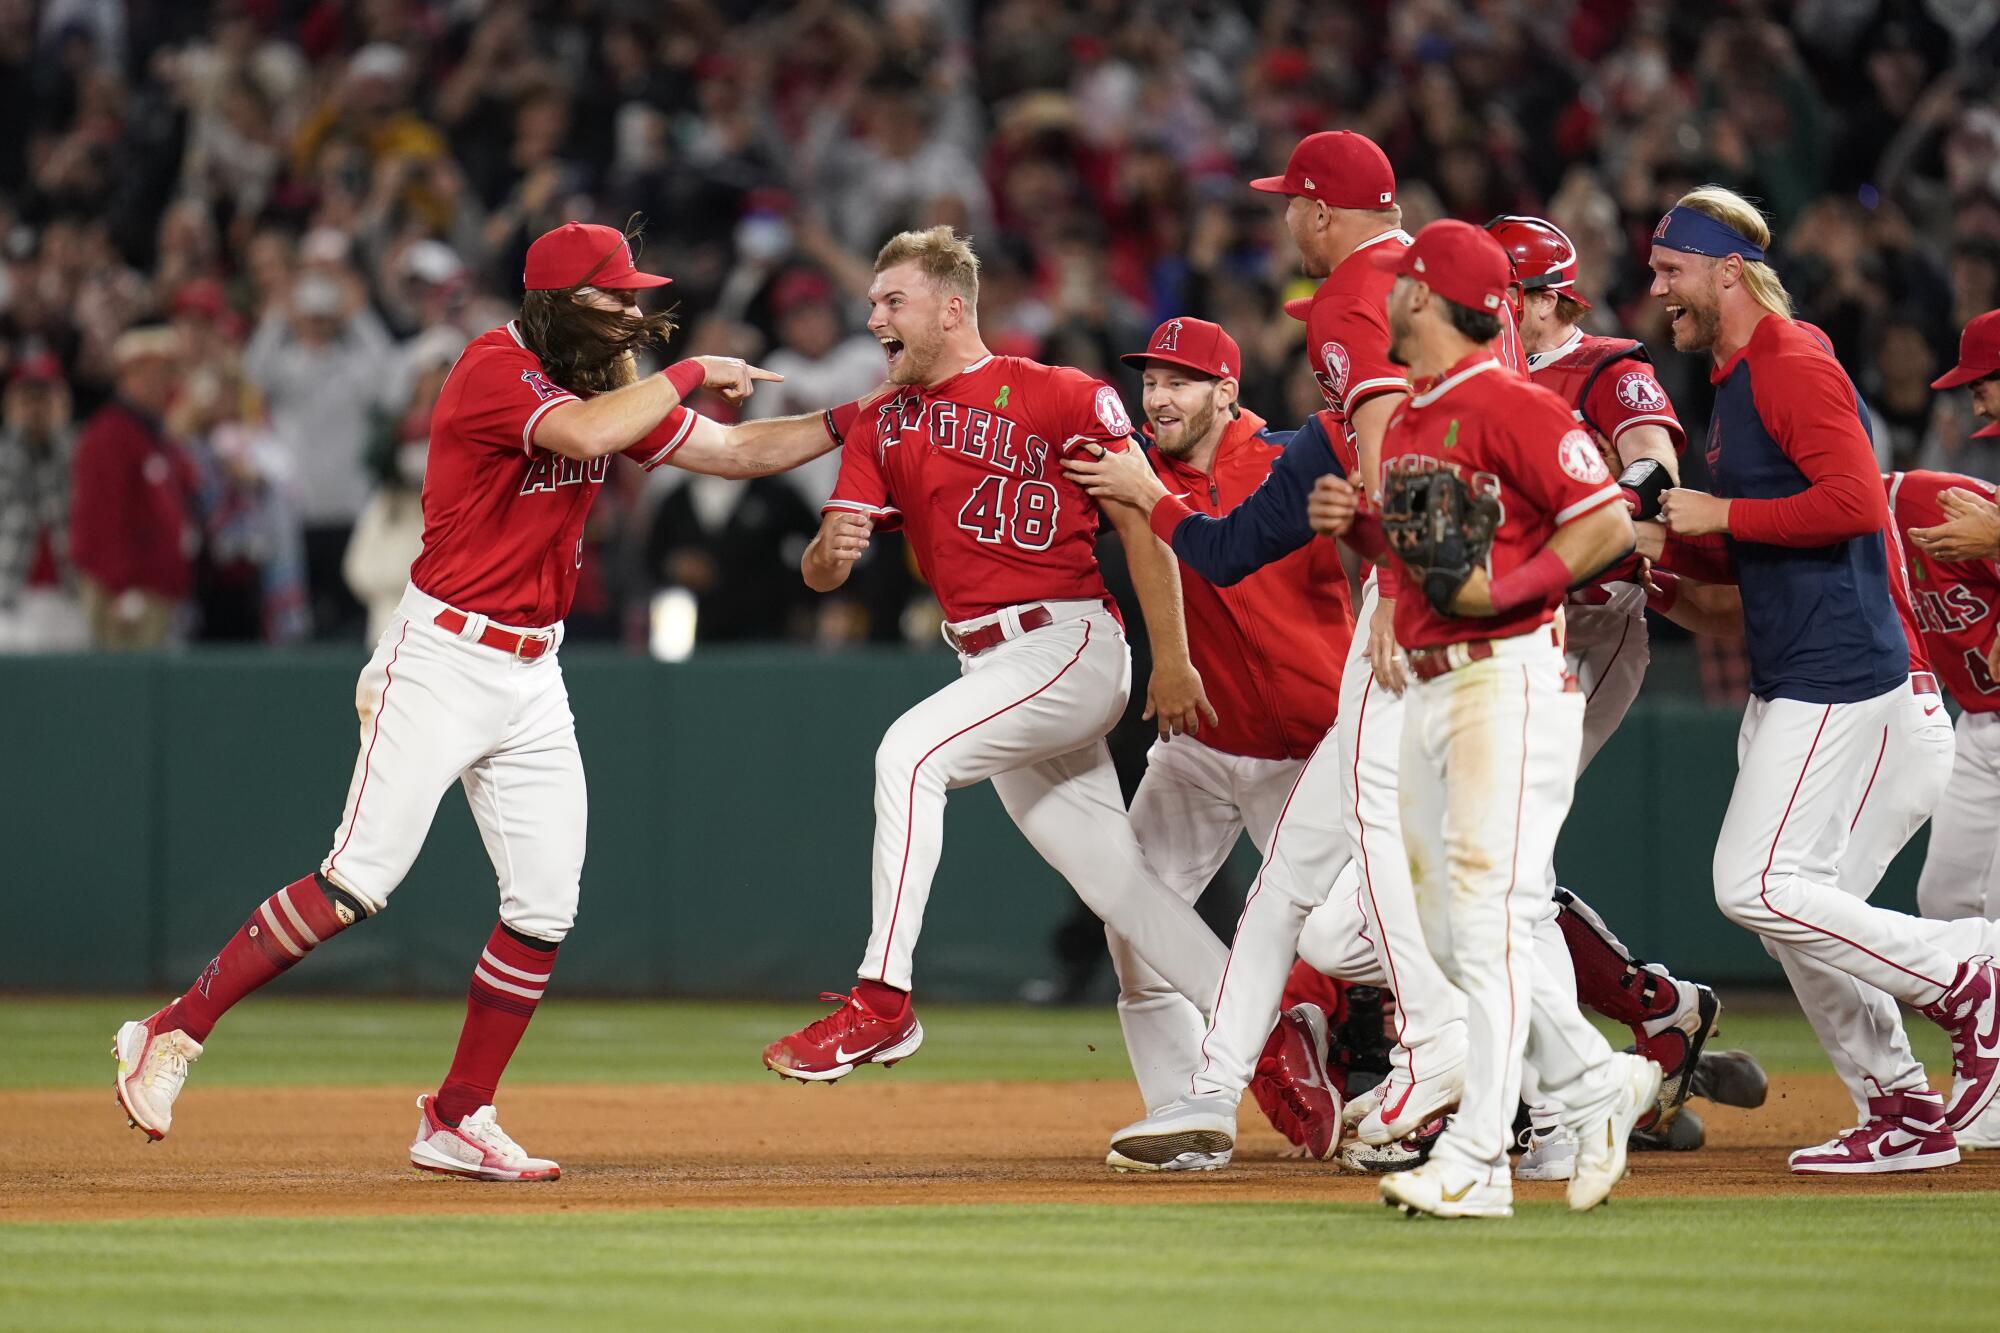 Reid Detmers (48) is swarmed by Angels teammates after completing a no-hitter against the Rays.